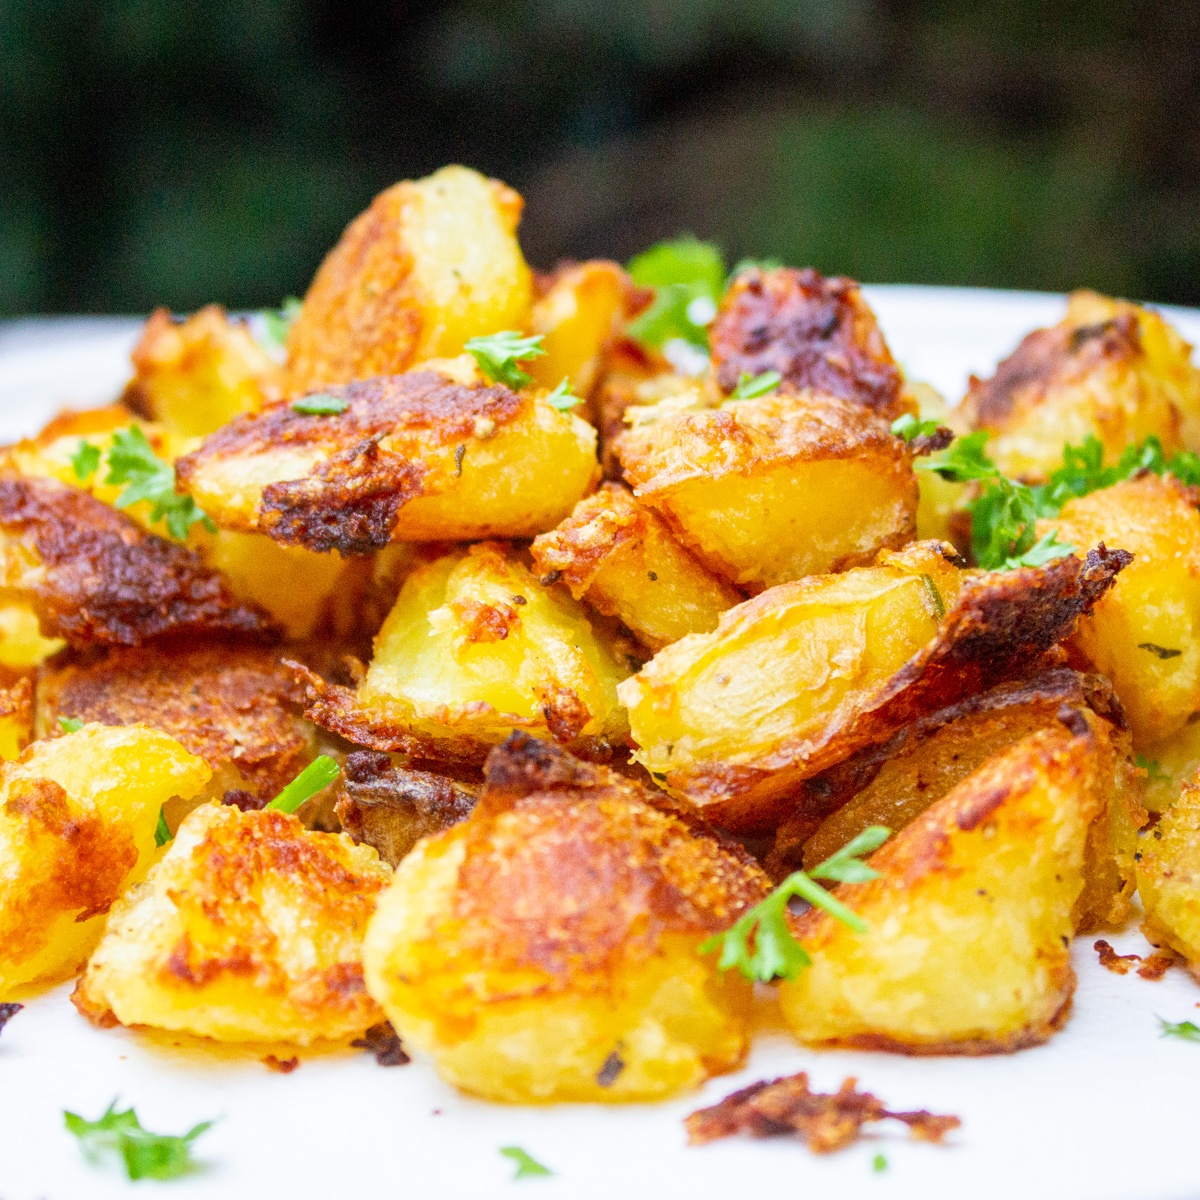 pile of roasted potatoes on white plate